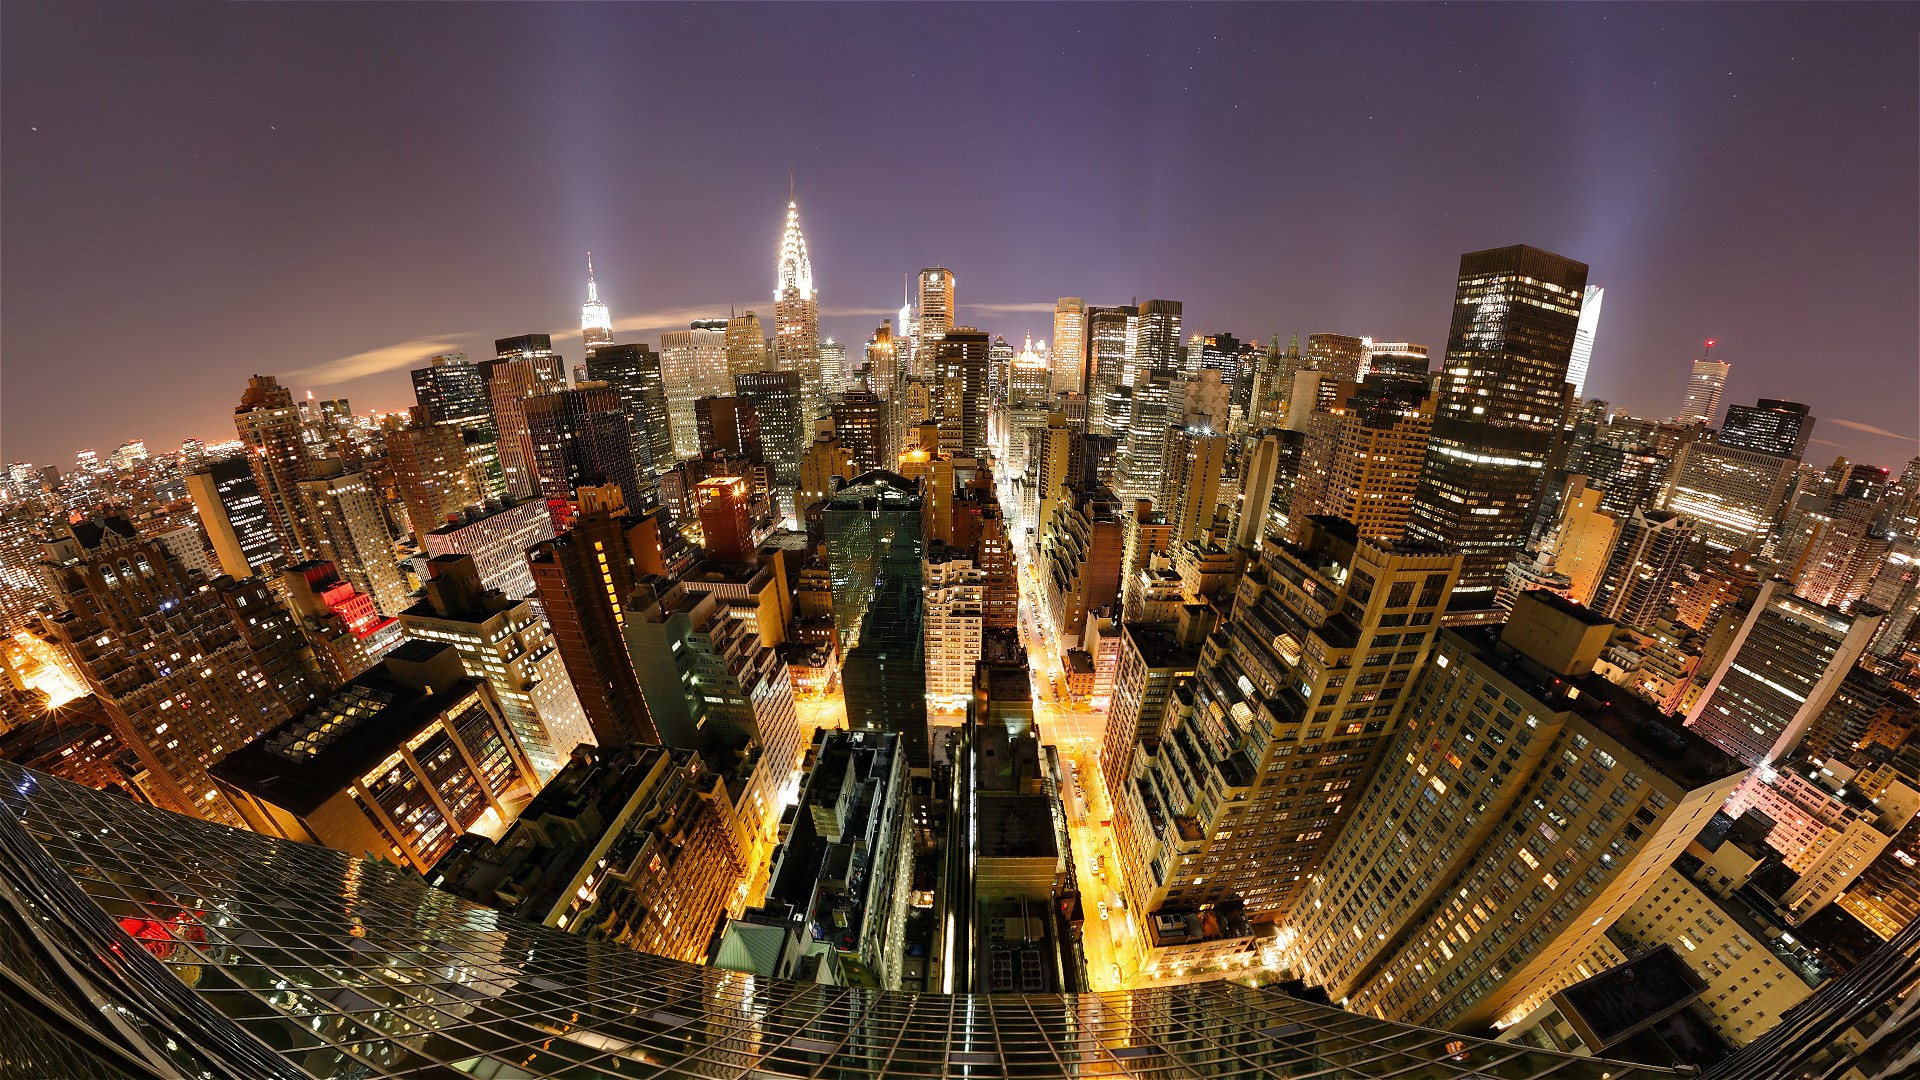 new york at night wallpapers images   Oni Djs